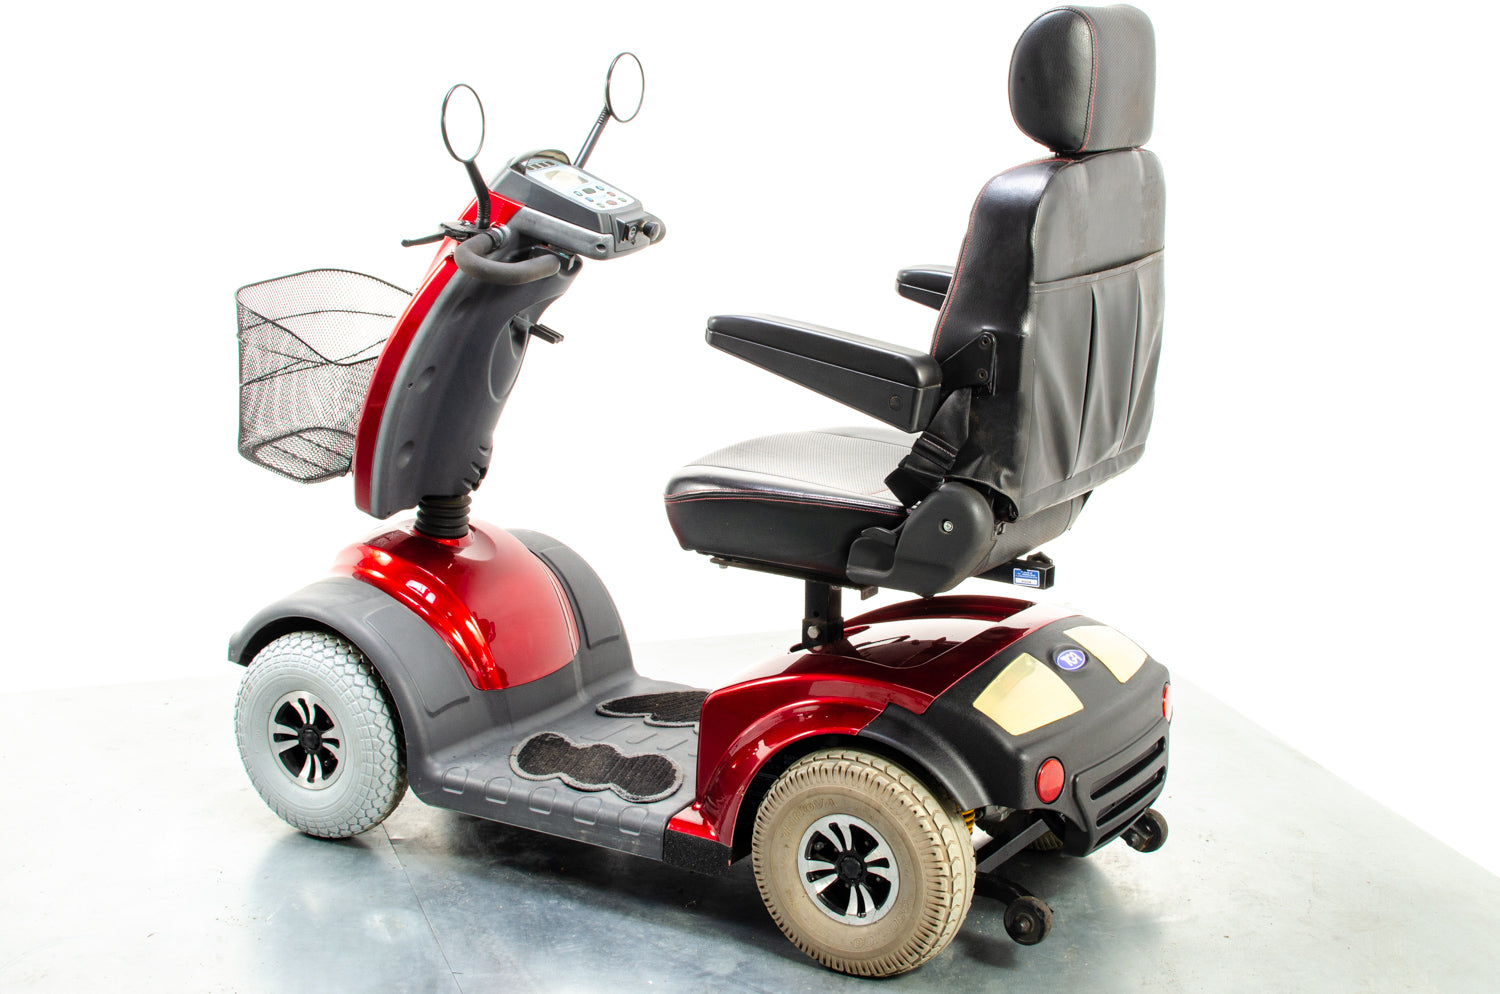 TGA Mystere Used Mobility Scooter Comfy 8mph Suspension Road All-Terrain Red